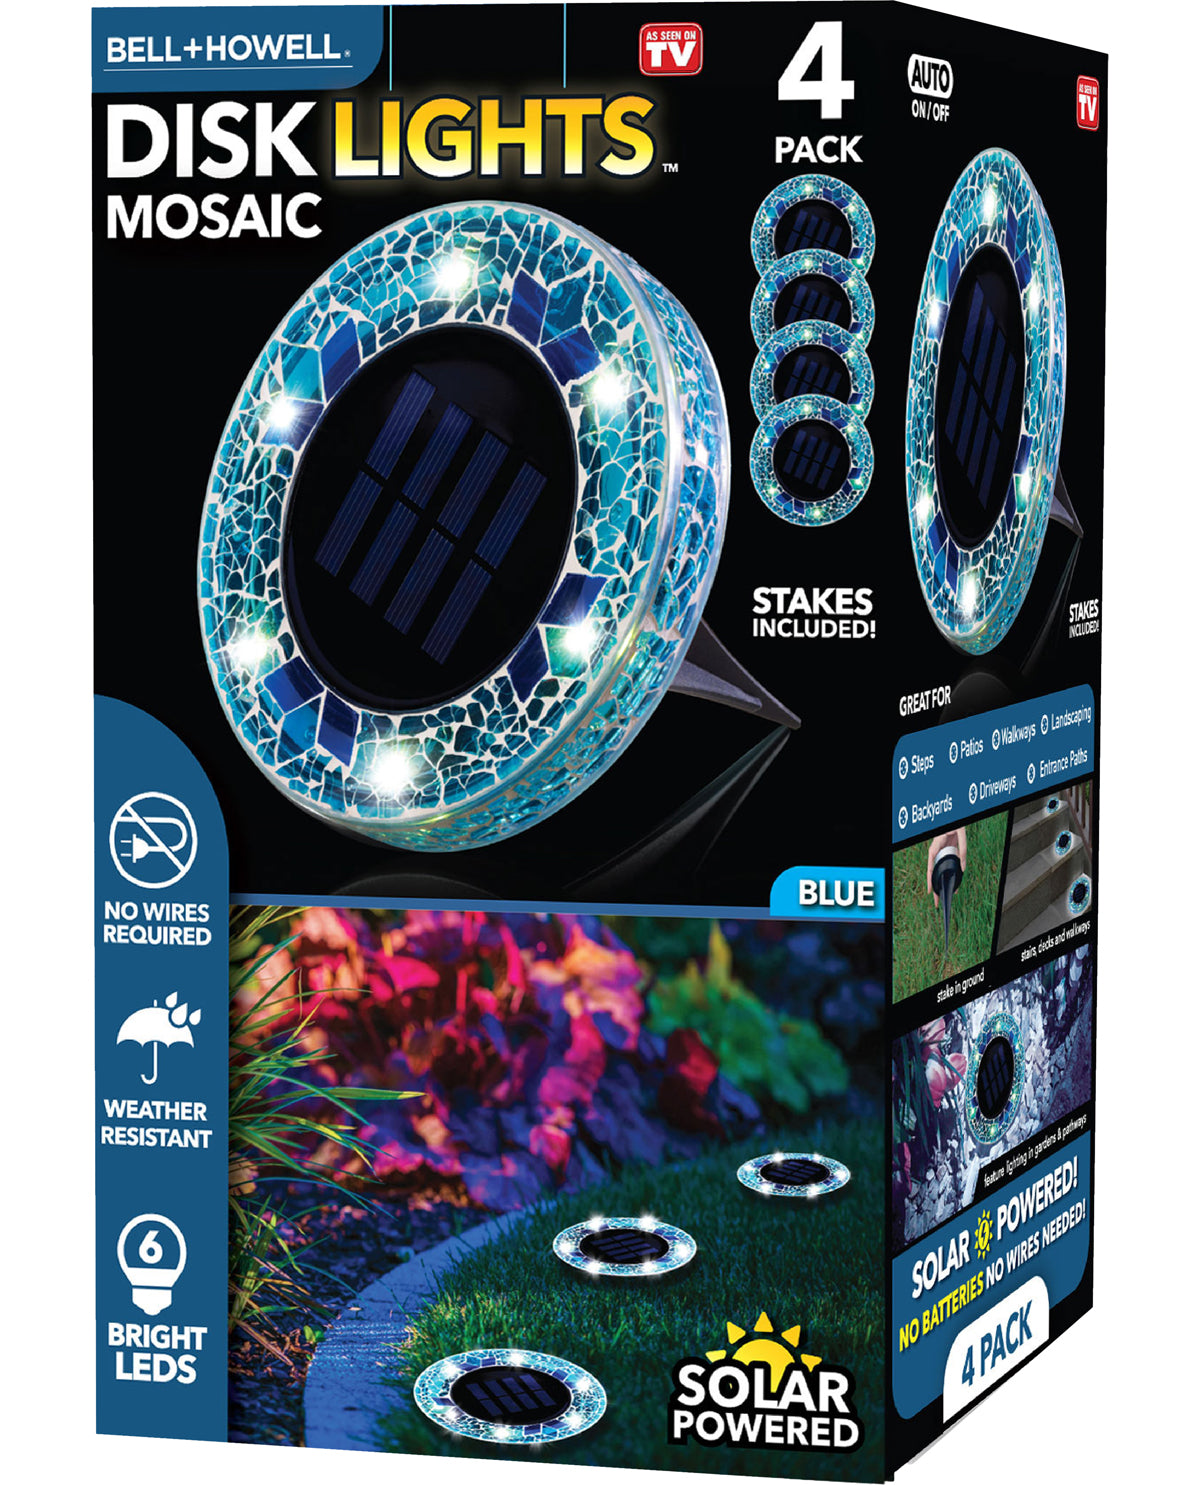 Bell+Howell Solar Powered Disk Lights with Blue Mosaic Glass (4-Pack)